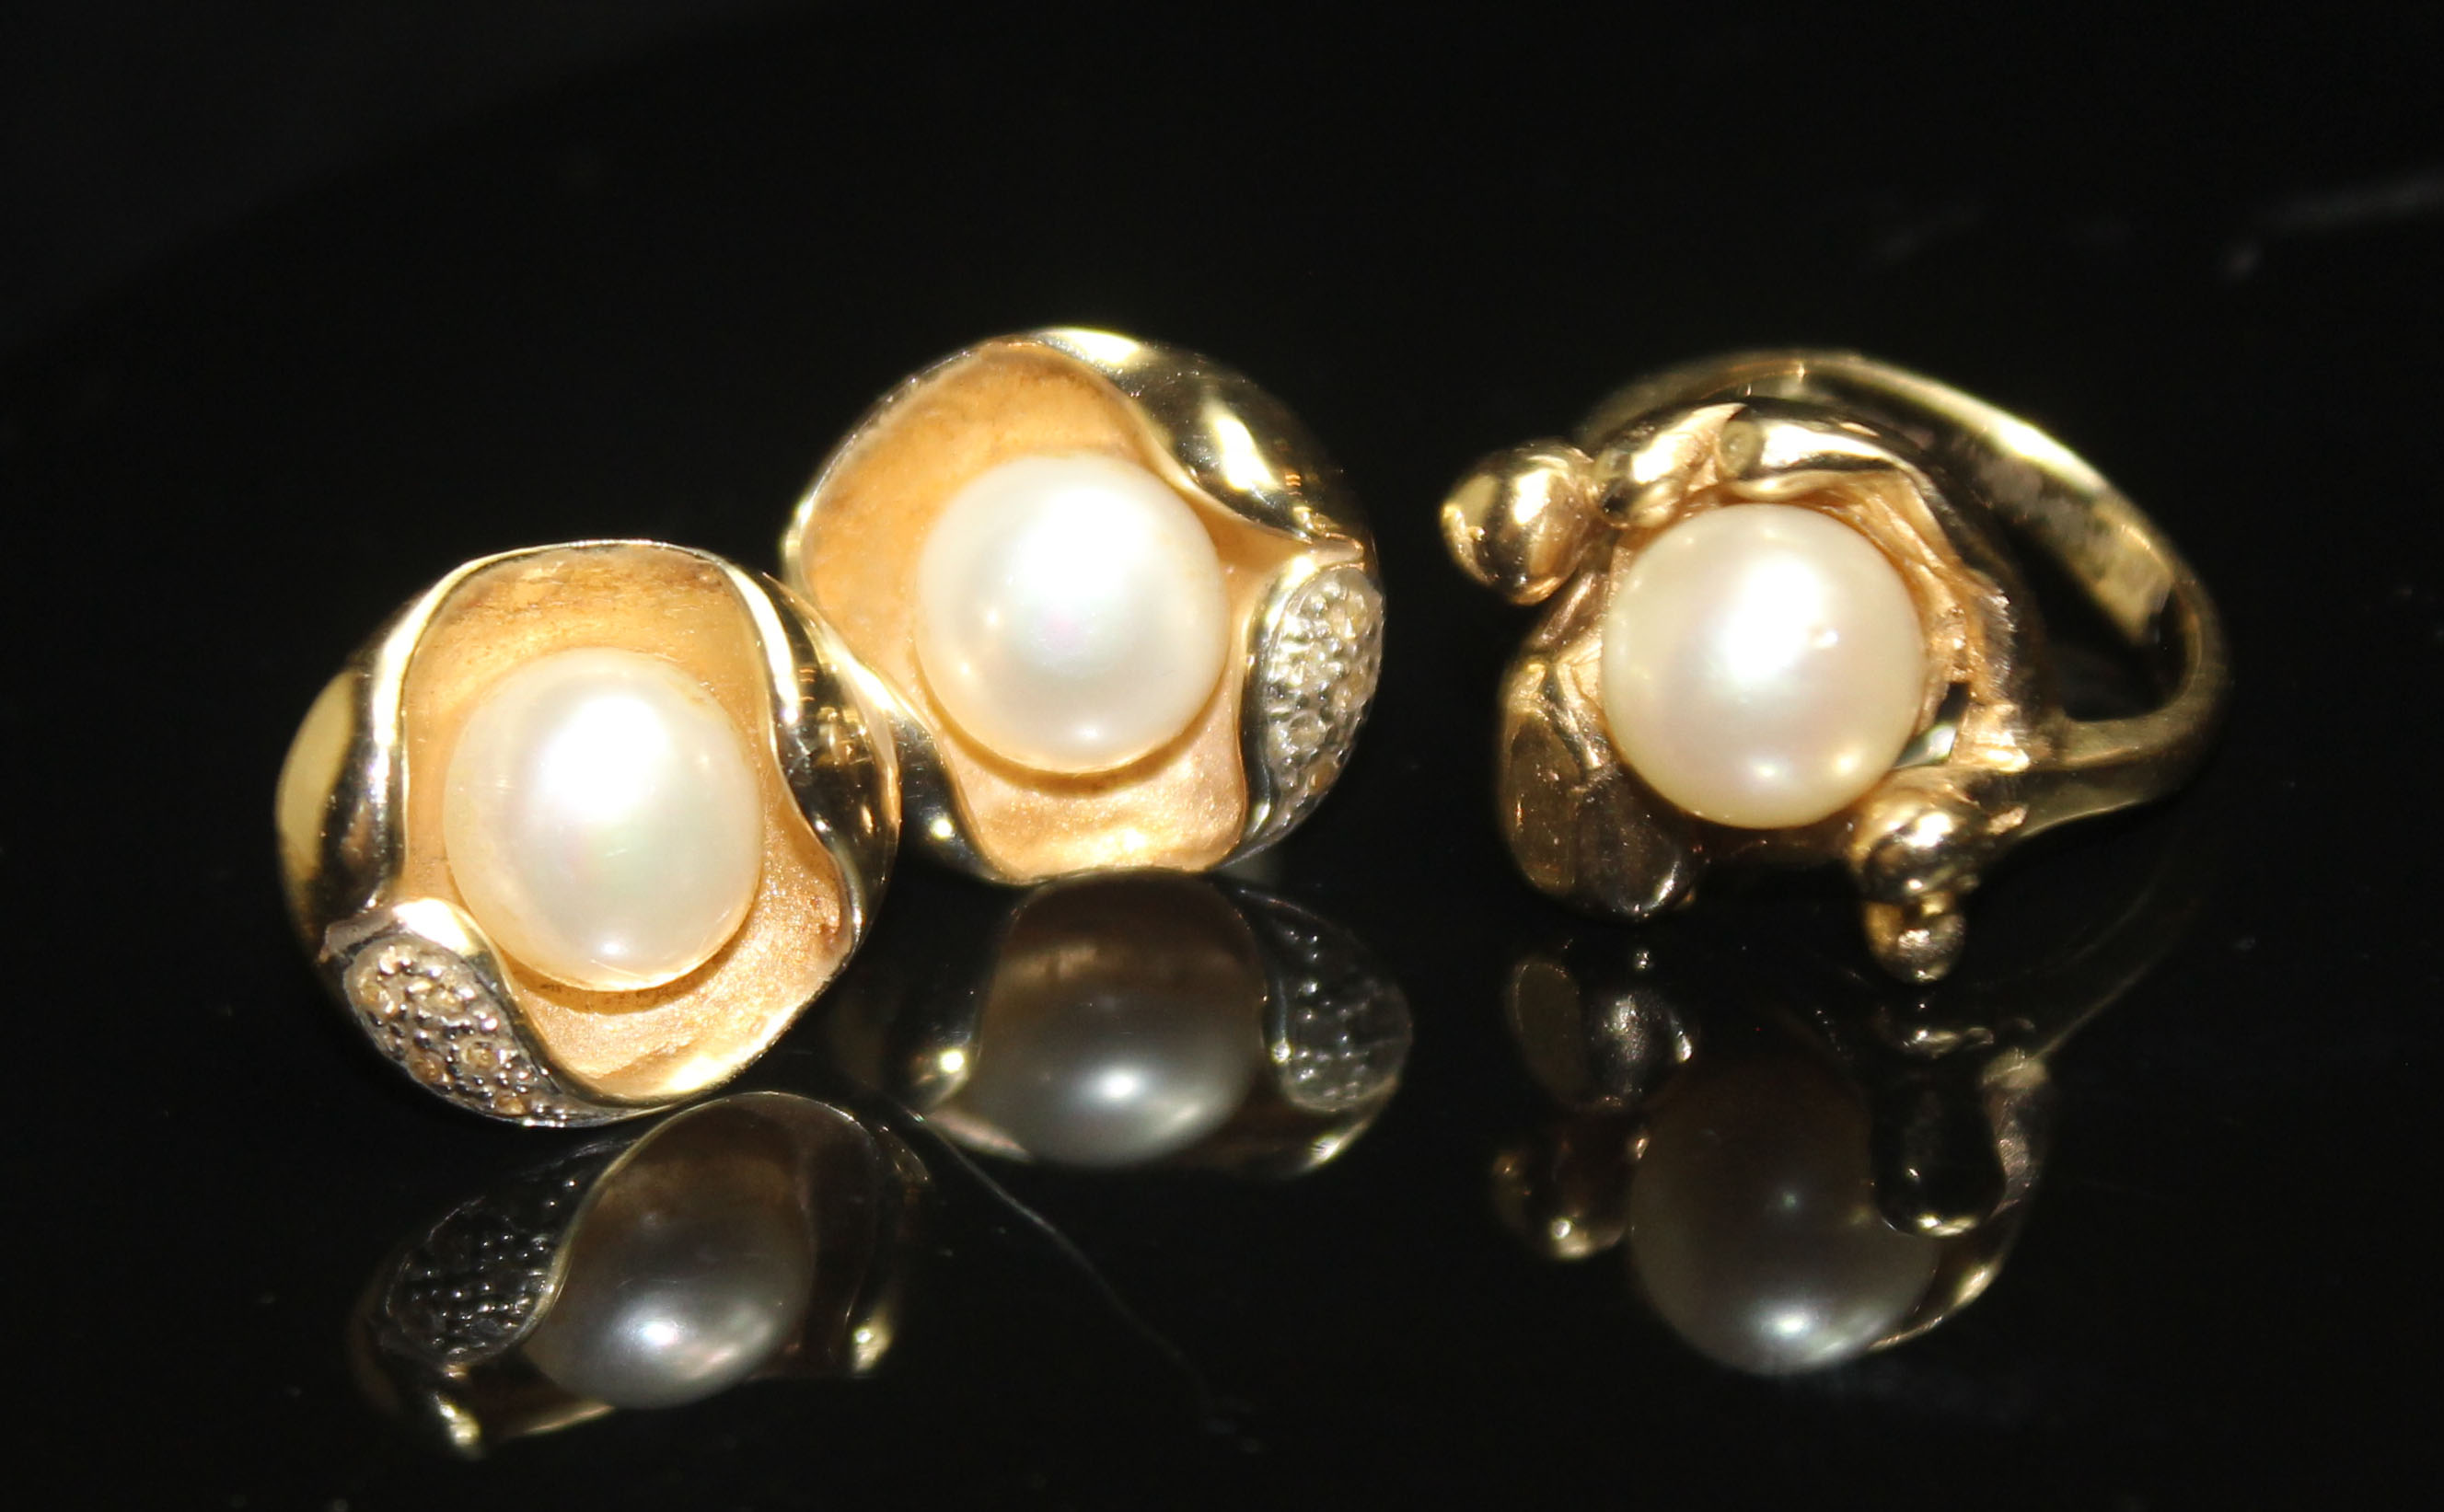 A MODERNIST 9CT GOLD AND PEARL DRESS RING. A single 7.6mm pearl in an organic, abstract mount to a